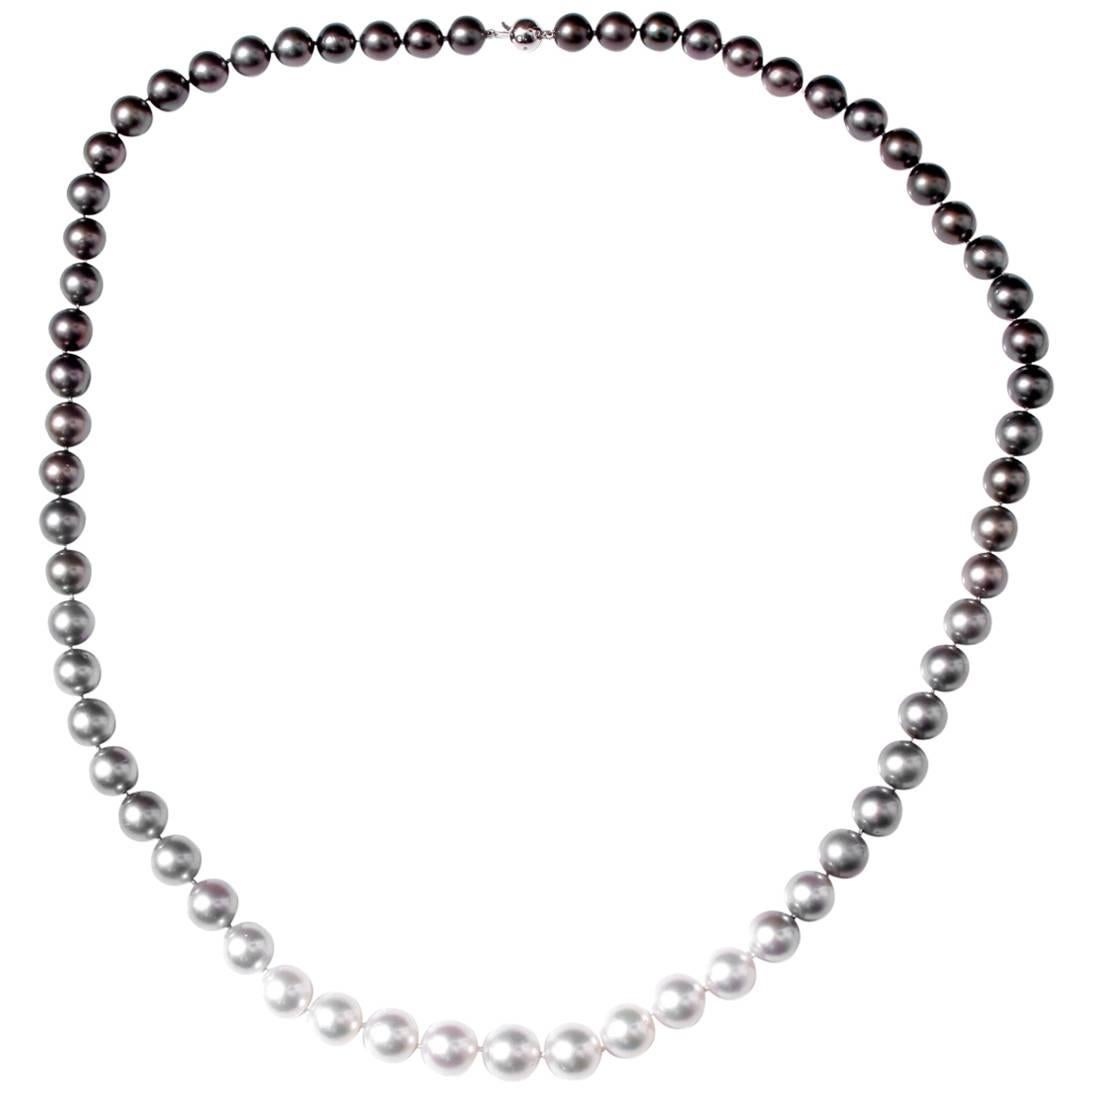 Stunning Ombre South Sea Pearl Necklace